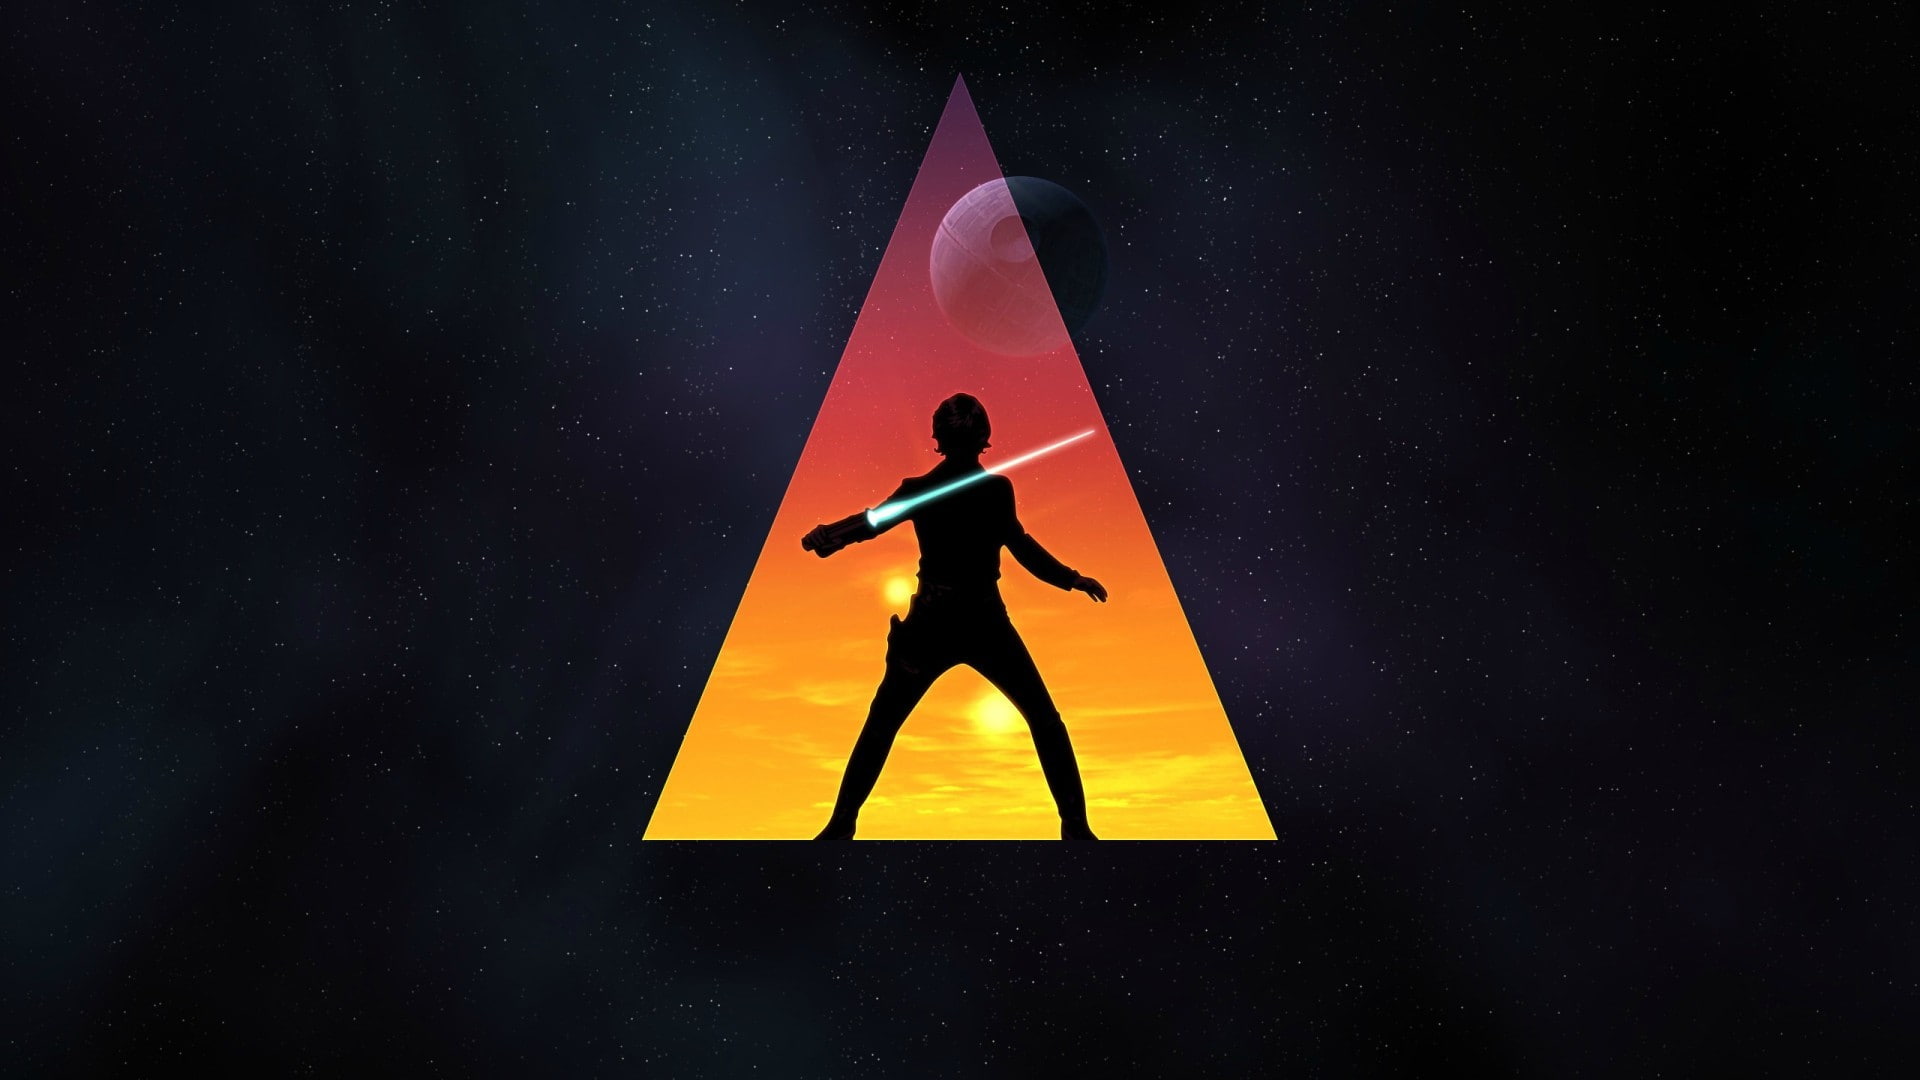 silhouette of person holding sword illustration, Star Wars, science fiction